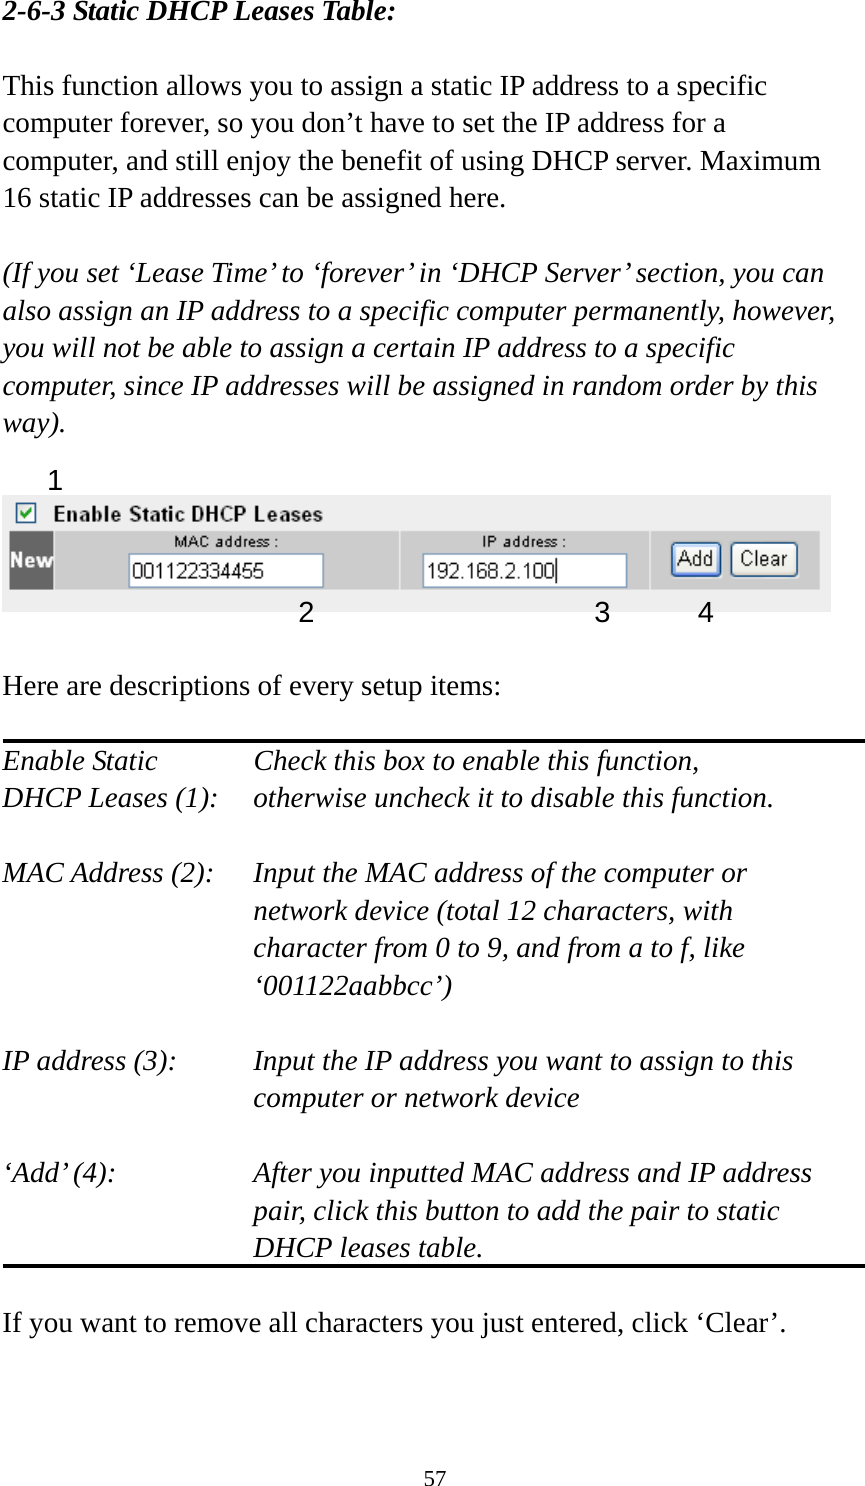 57 2-6-3 Static DHCP Leases Table:  This function allows you to assign a static IP address to a specific computer forever, so you don’t have to set the IP address for a computer, and still enjoy the benefit of using DHCP server. Maximum 16 static IP addresses can be assigned here.  (If you set ‘Lease Time’ to ‘forever’ in ‘DHCP Server’ section, you can also assign an IP address to a specific computer permanently, however, you will not be able to assign a certain IP address to a specific computer, since IP addresses will be assigned in random order by this way).     Here are descriptions of every setup items:  Enable Static      Check this box to enable this function, DHCP Leases (1):    otherwise uncheck it to disable this function.  MAC Address (2):    Input the MAC address of the computer or network device (total 12 characters, with character from 0 to 9, and from a to f, like ‘001122aabbcc’)   IP address (3):    Input the IP address you want to assign to this computer or network device    ‘Add’ (4):    After you inputted MAC address and IP address pair, click this button to add the pair to static DHCP leases table.  If you want to remove all characters you just entered, click ‘Clear’.   1 2 3 4 